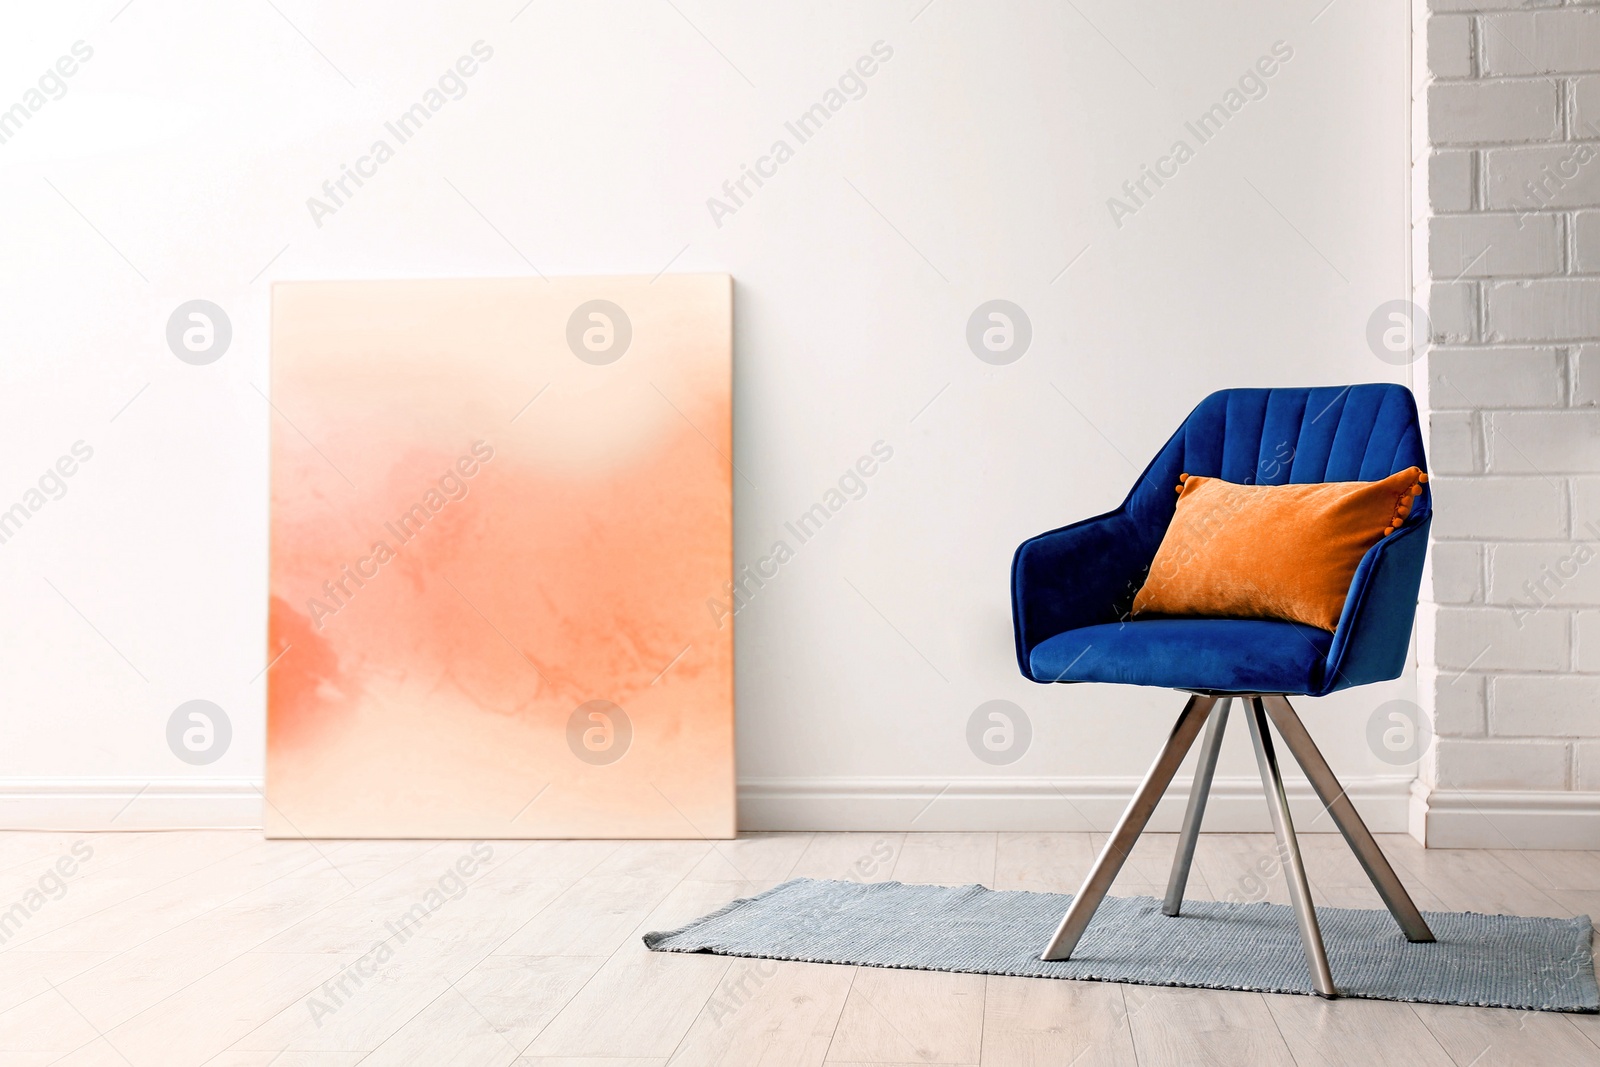 Image of Comfortable armchair with orange cushion in stylish room interior